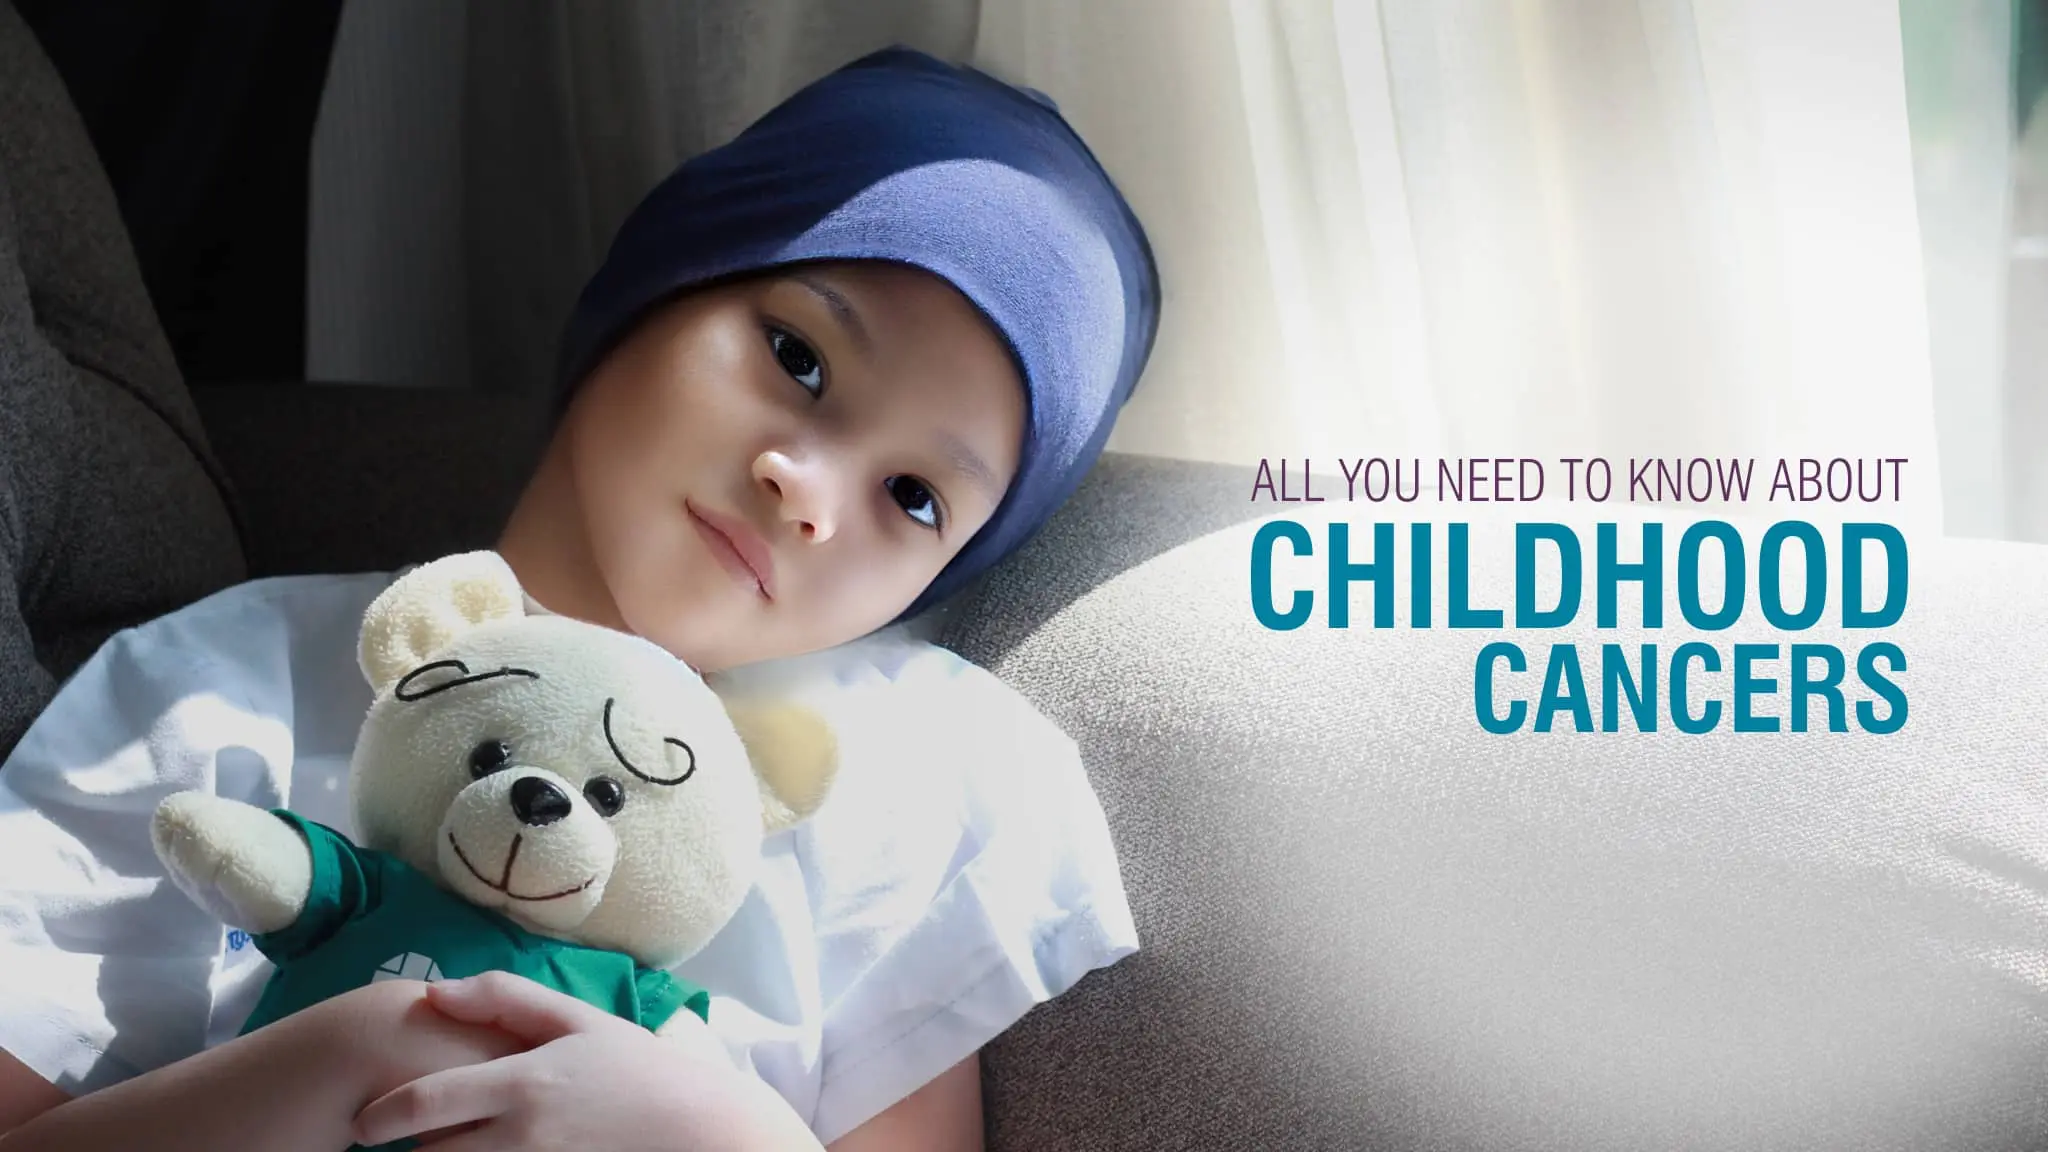 All you need to know about Childhood Cancers